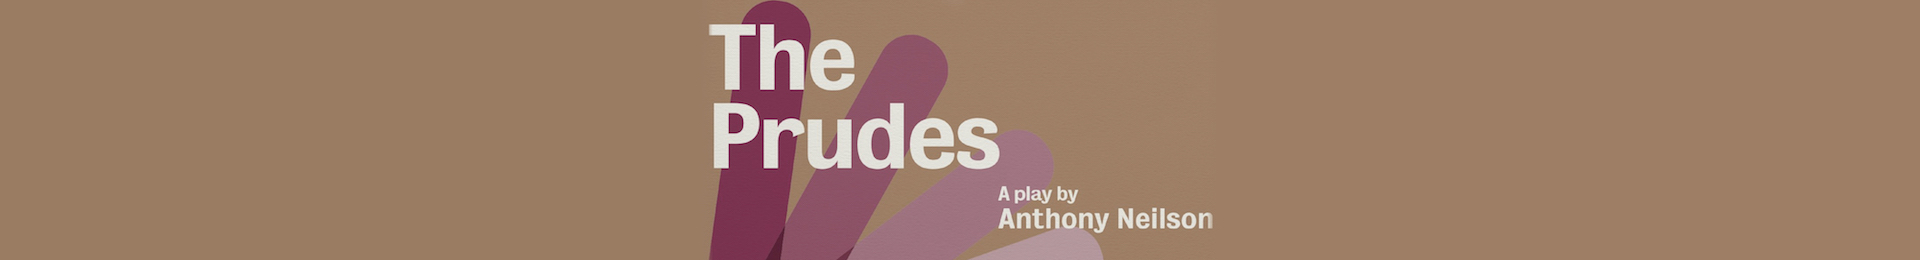 The Prudes banner image